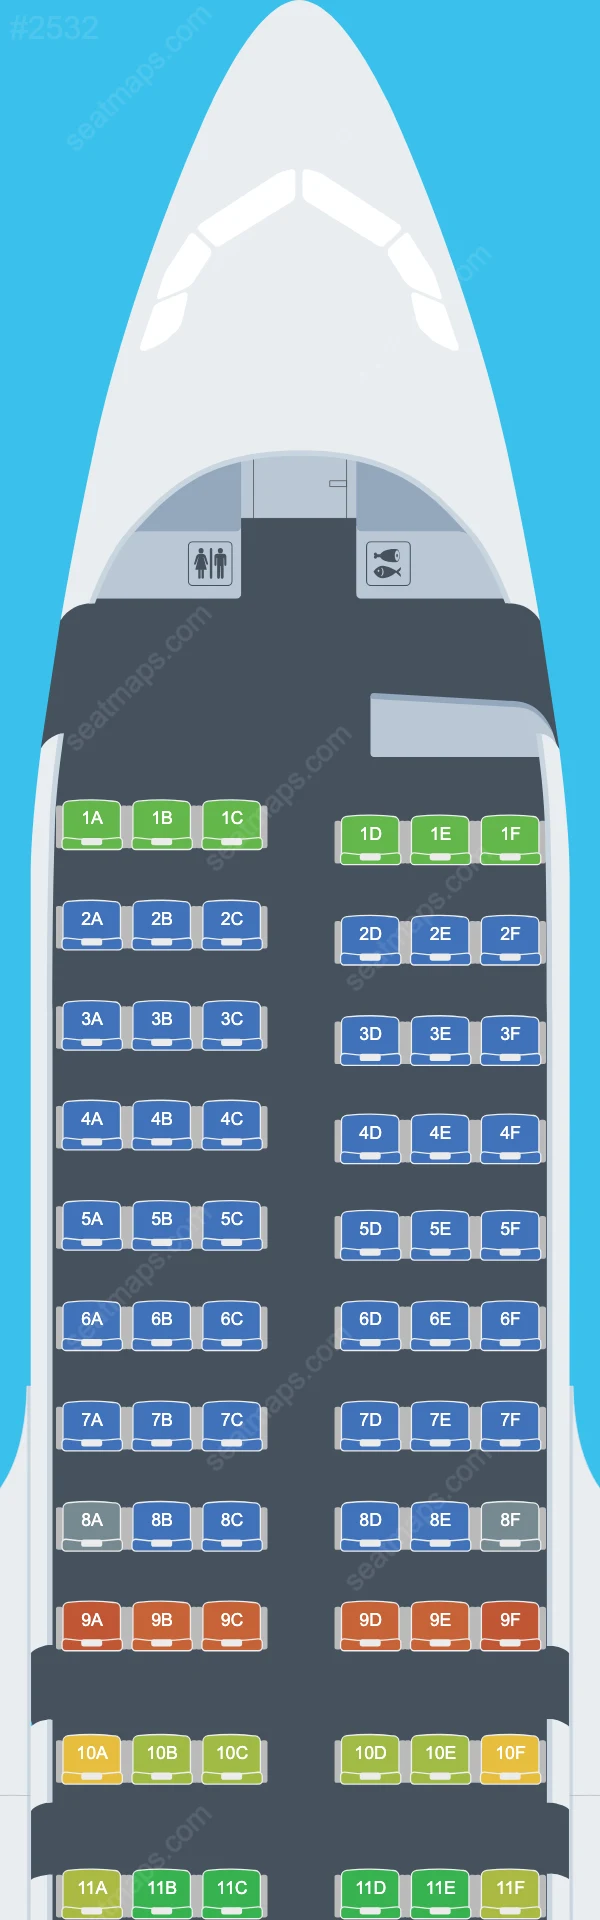 iFly Airlines Airbus A319 Seat Maps A319-100